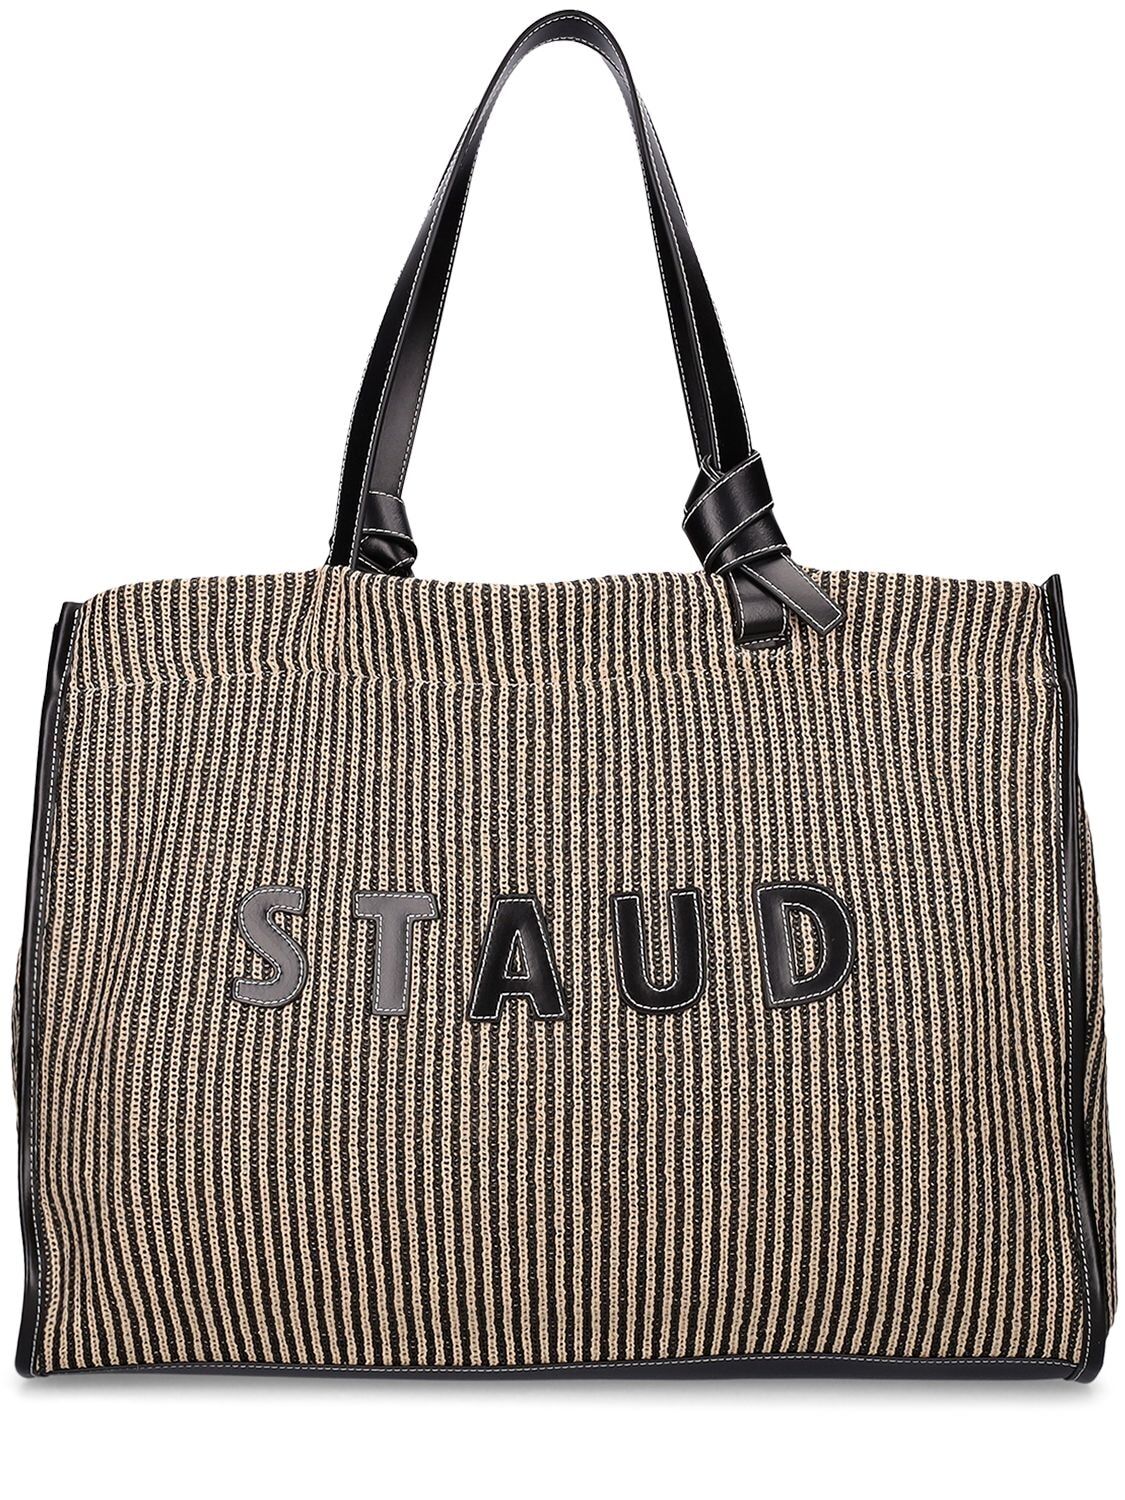 STAUD Cleo Fabric & Leather Tote Bag in black